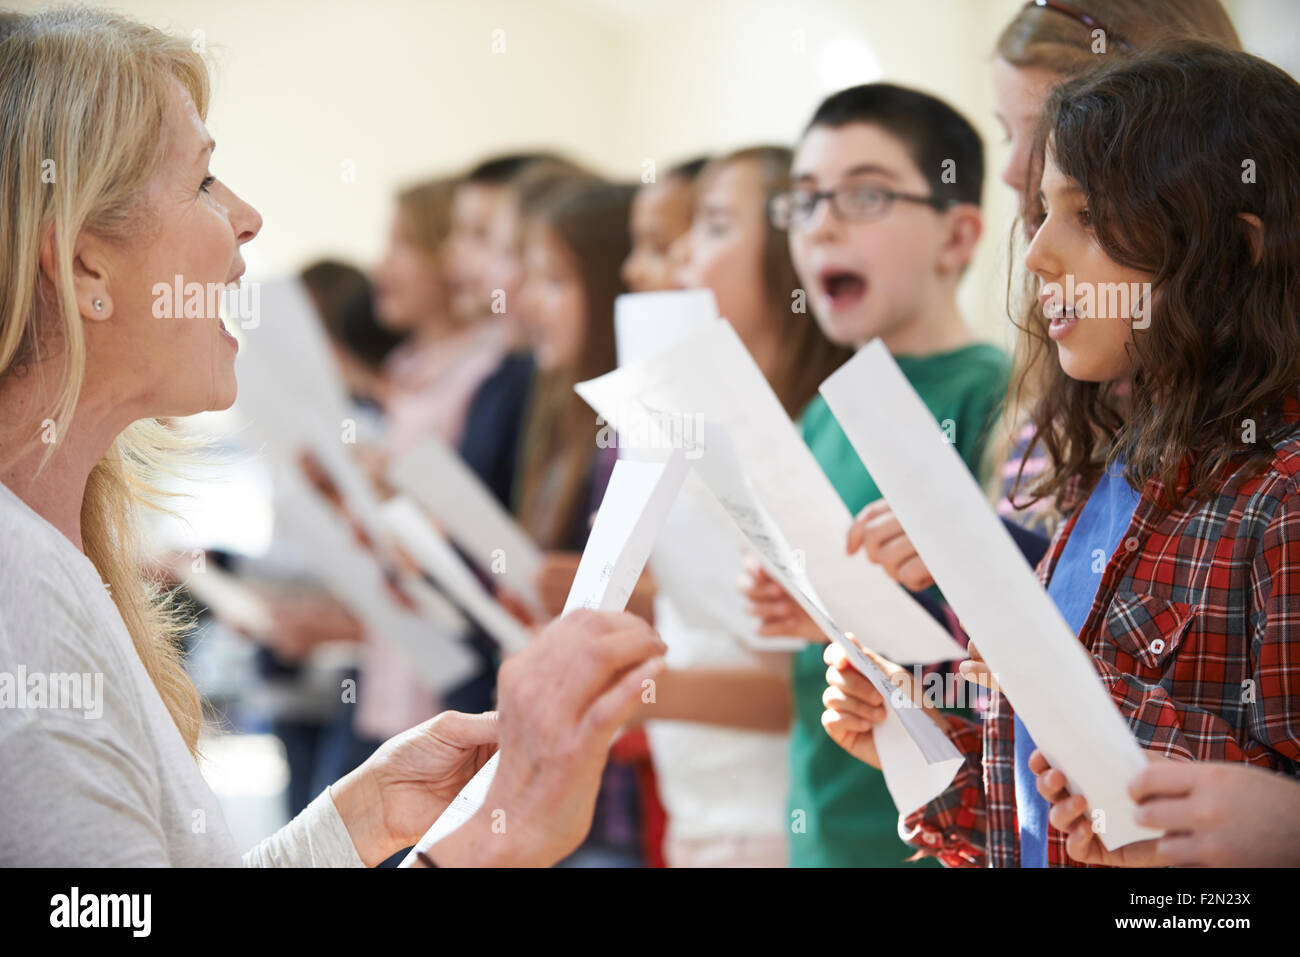 Children In Singing Group Being Encouraged By Teacher Stock Photo